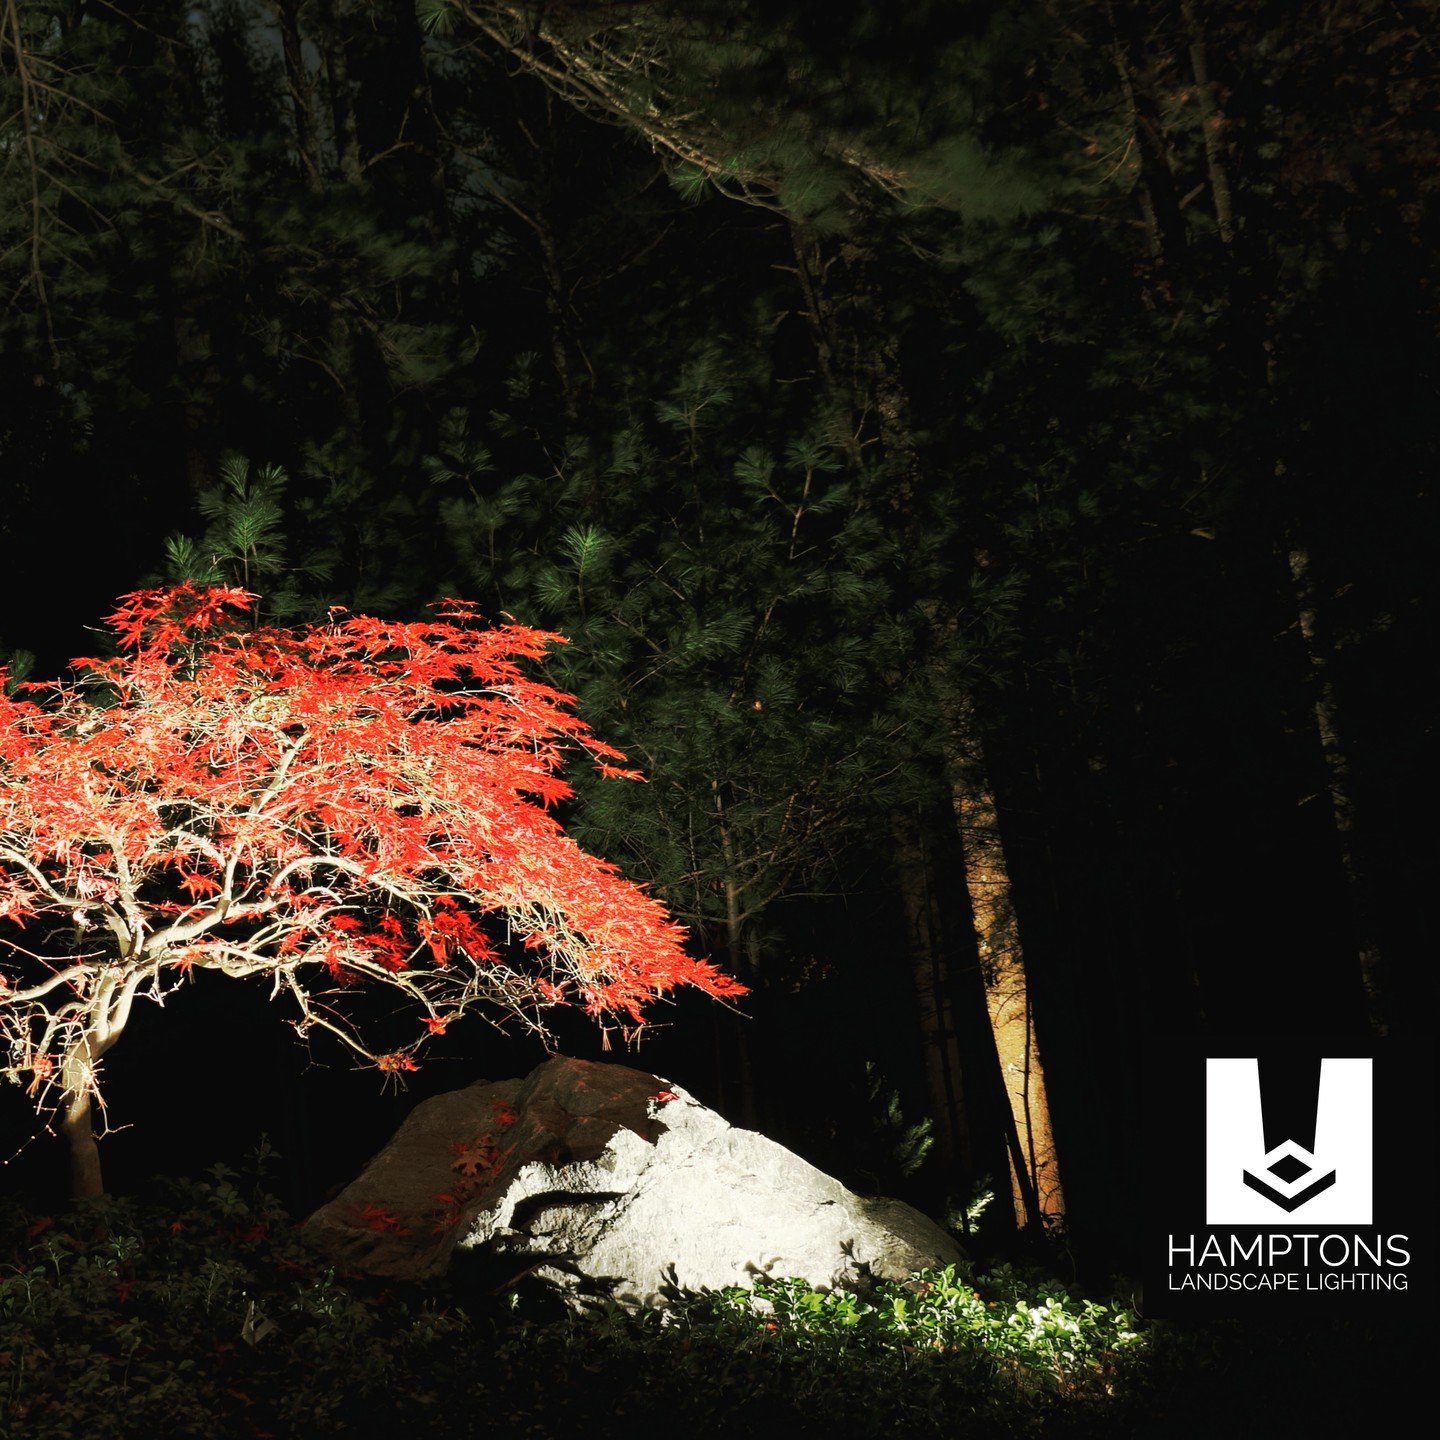 🍁✨ Enchanted Evenings Await! Dive into the tranquility of our latest masterpiece. This Japanese maple, bathed in the soft glow of our meticulously placed landscape lights, stands as a testament to nature's beauty enhanced by thoughtful design. The l